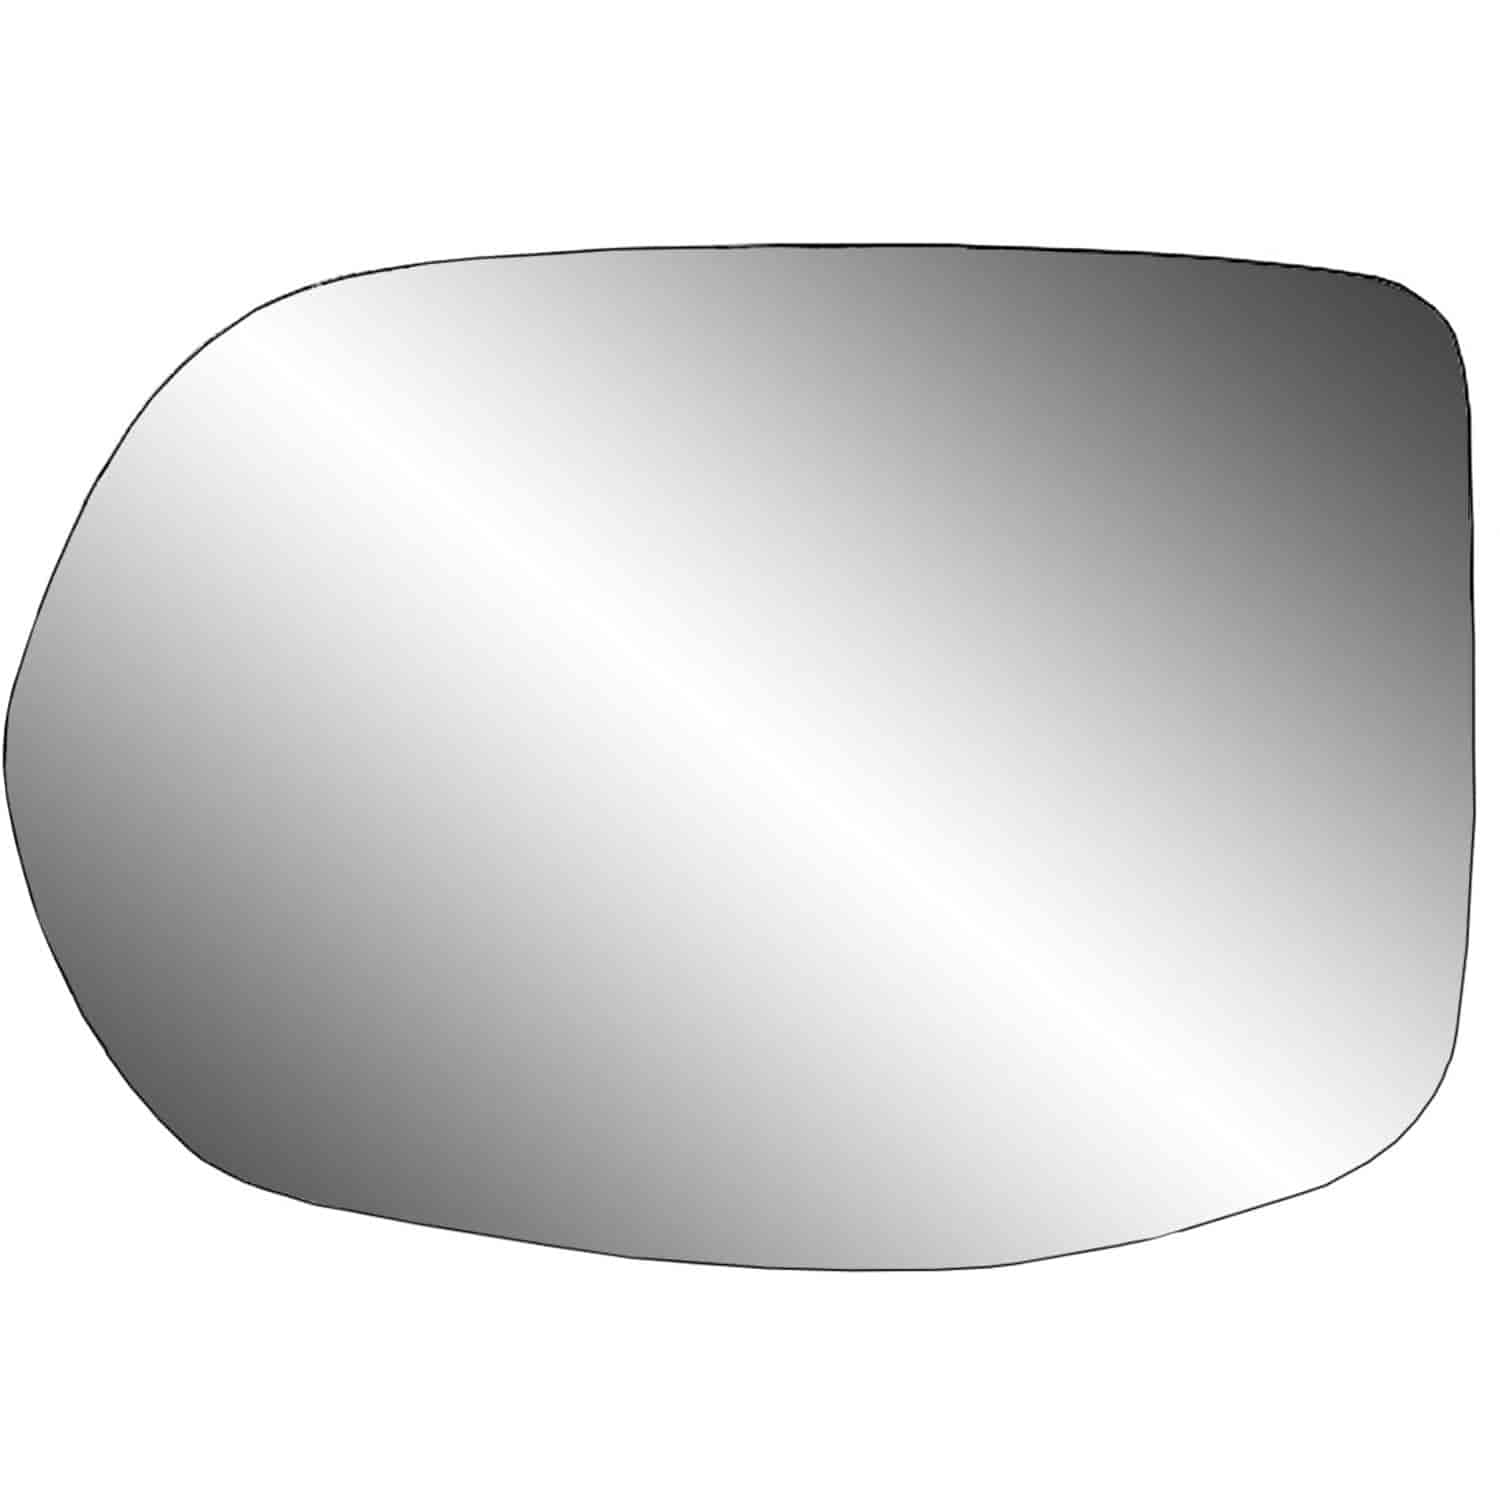 Replacement Glass Assembly for 12-14 CR-V replace your cracked or broken driver side mirror glass at